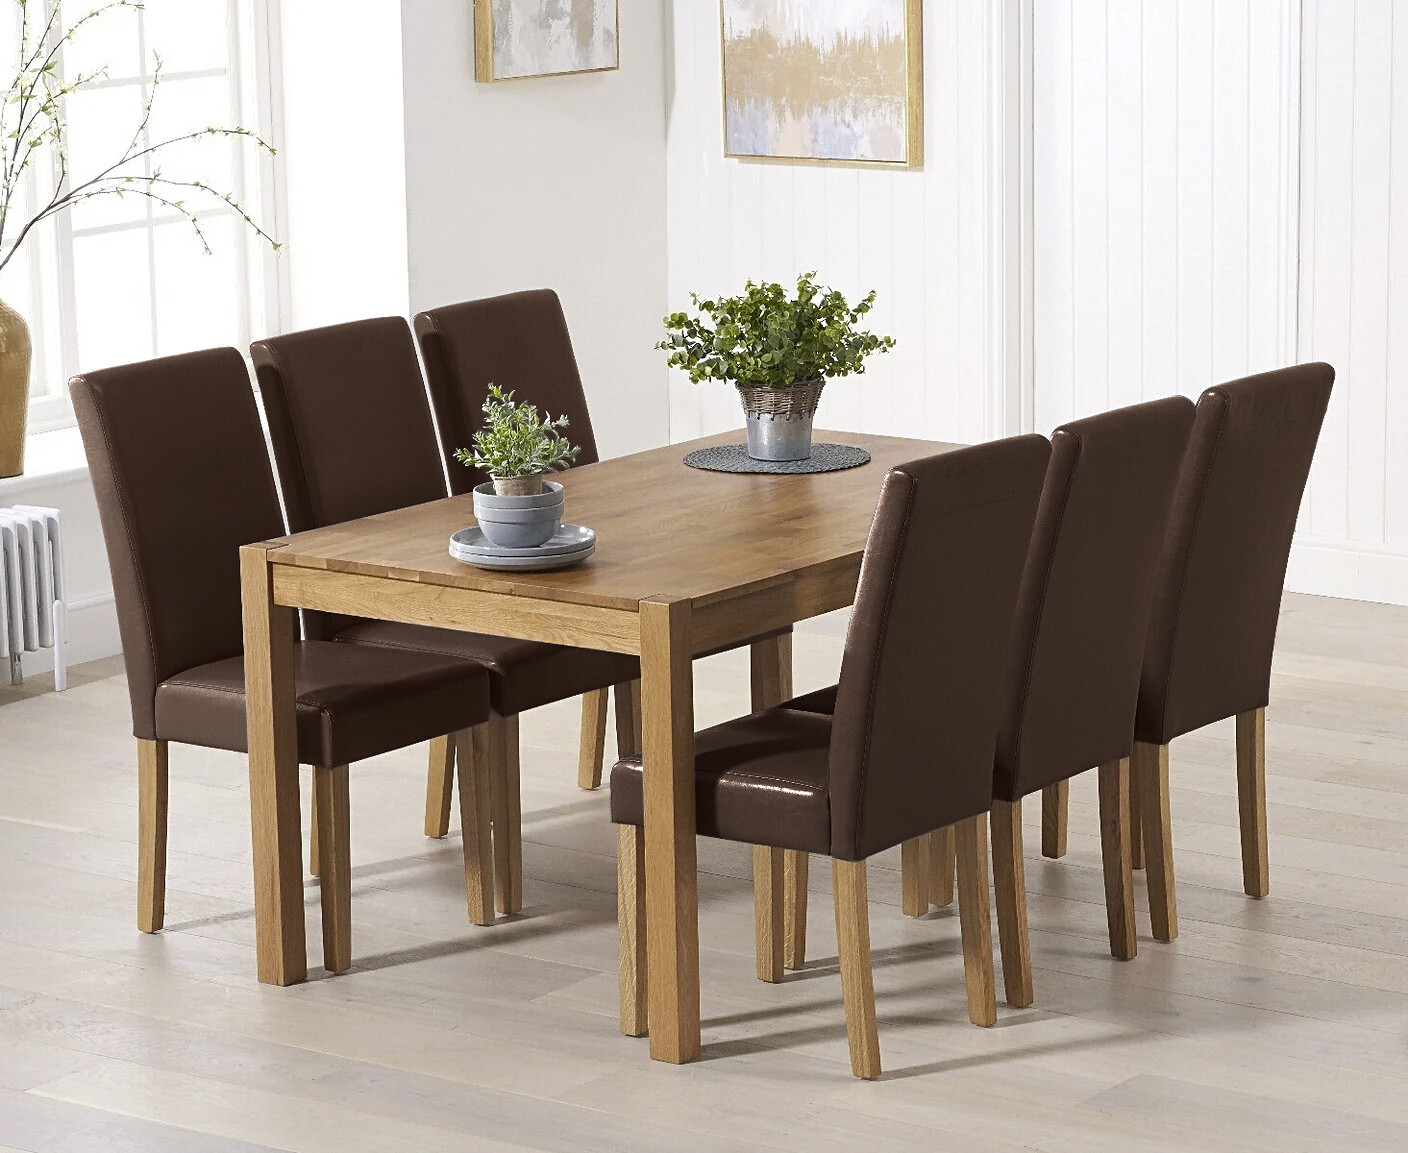 York 150cm Solid Oak Dining Table With 6 Brown Olivia Chairs